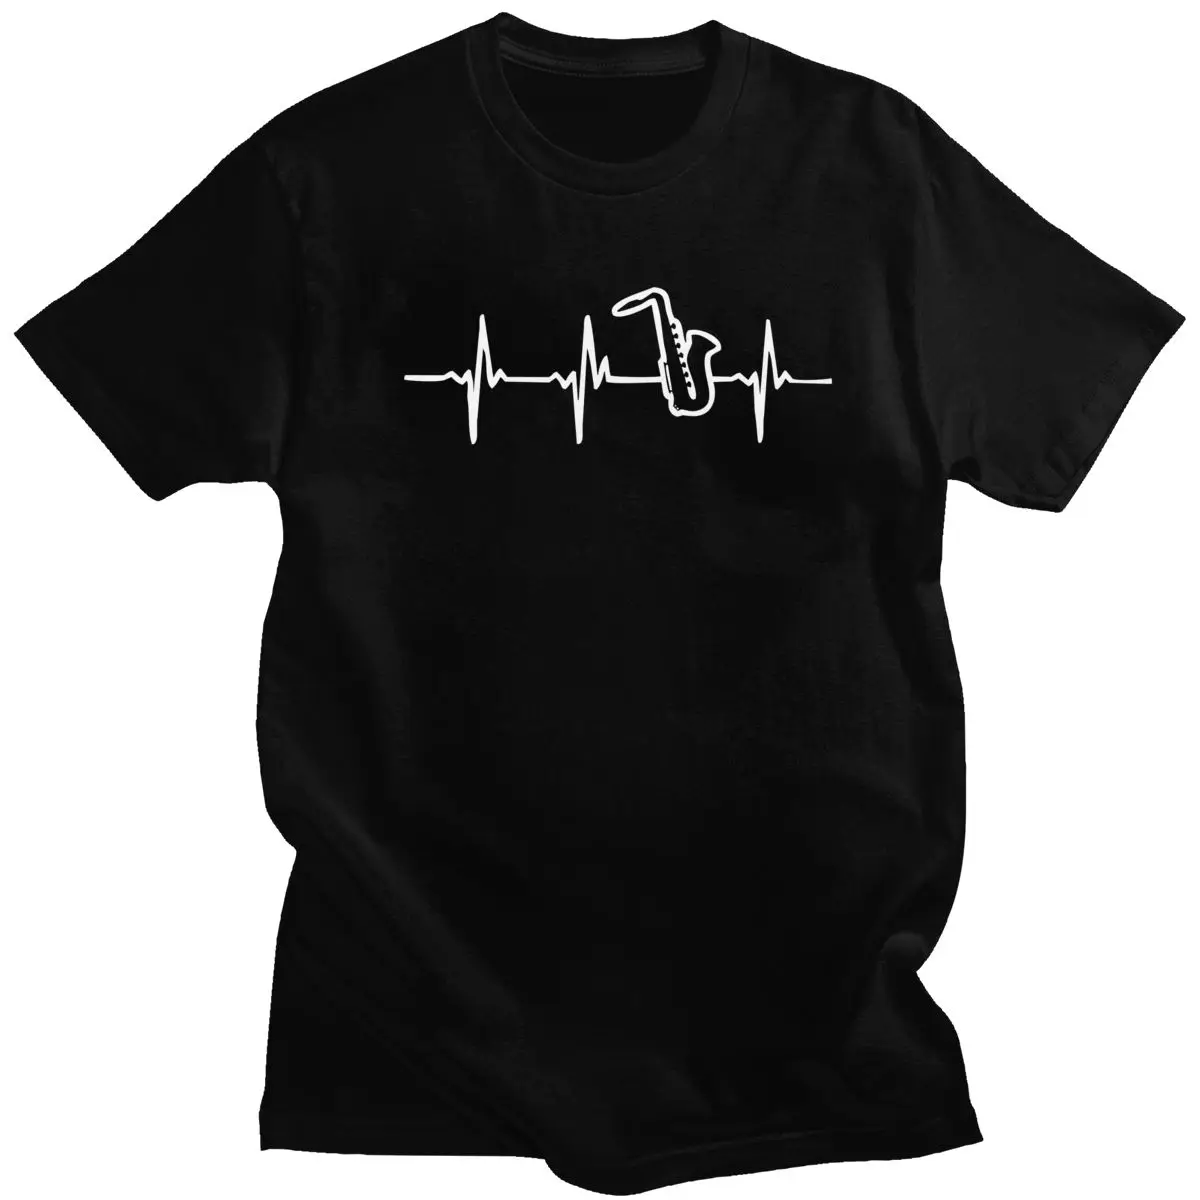 

Saxophone Heartbeat Tee Shirt Homme Cotton Jazz Sax Lover Tshirt Saxophonist Gift Top Short Sleeved Funny T-shirt Merch Clothing